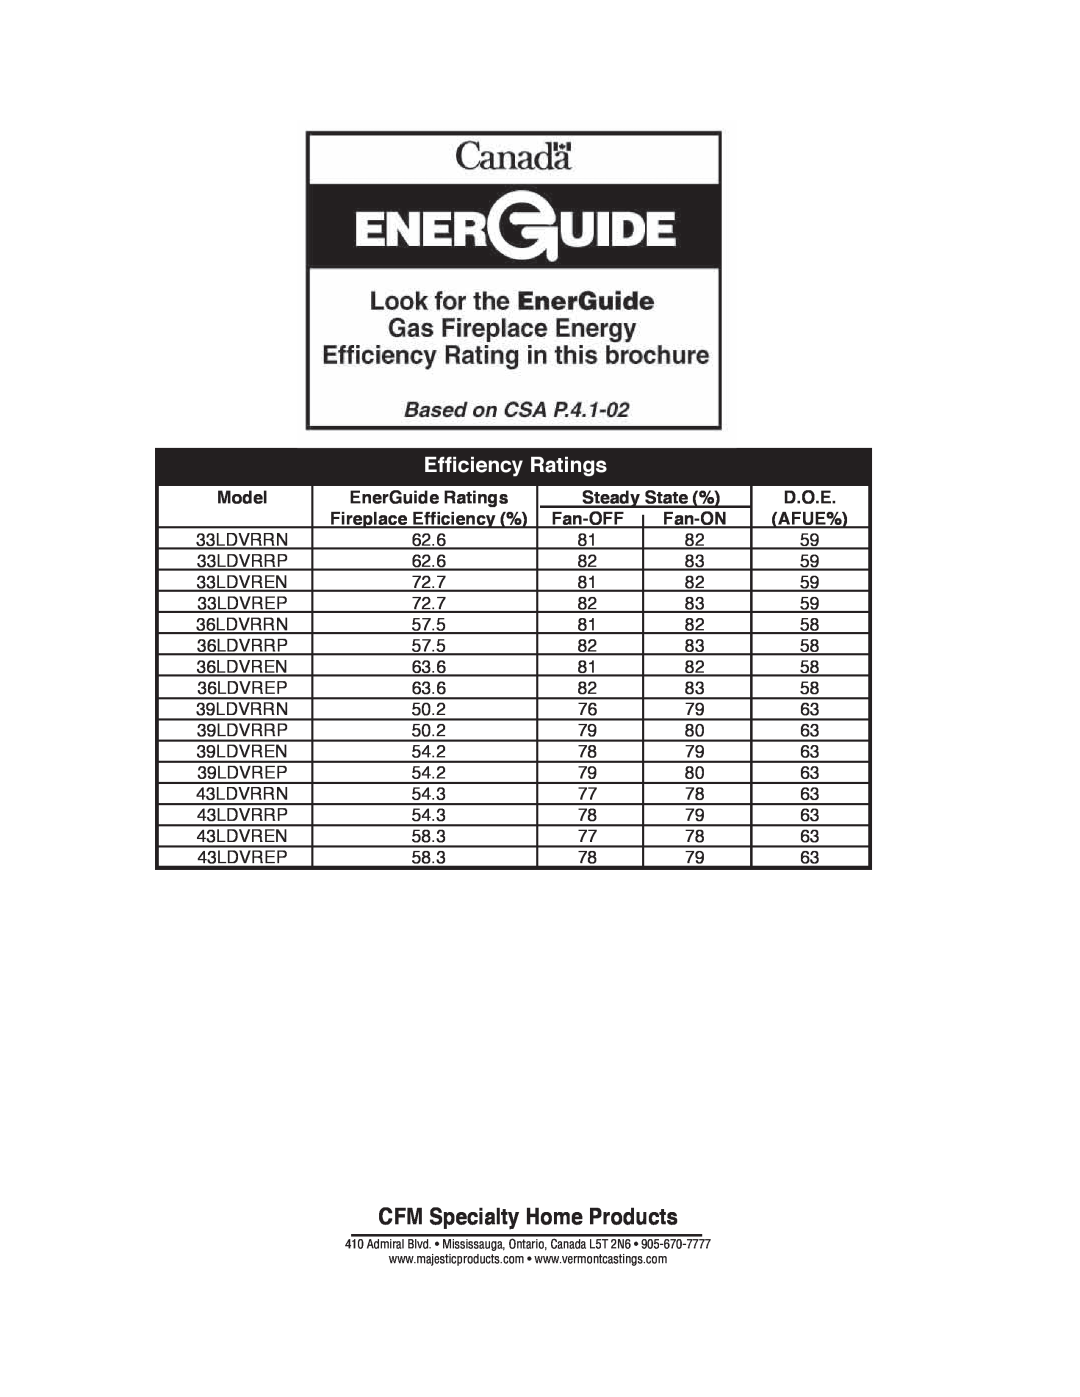 Majestic Appliances 33LDVR Efﬁciency Ratings, CFM Specialty Home Products, Model, EnerGuide Ratings, Steady State %, D.O.E 